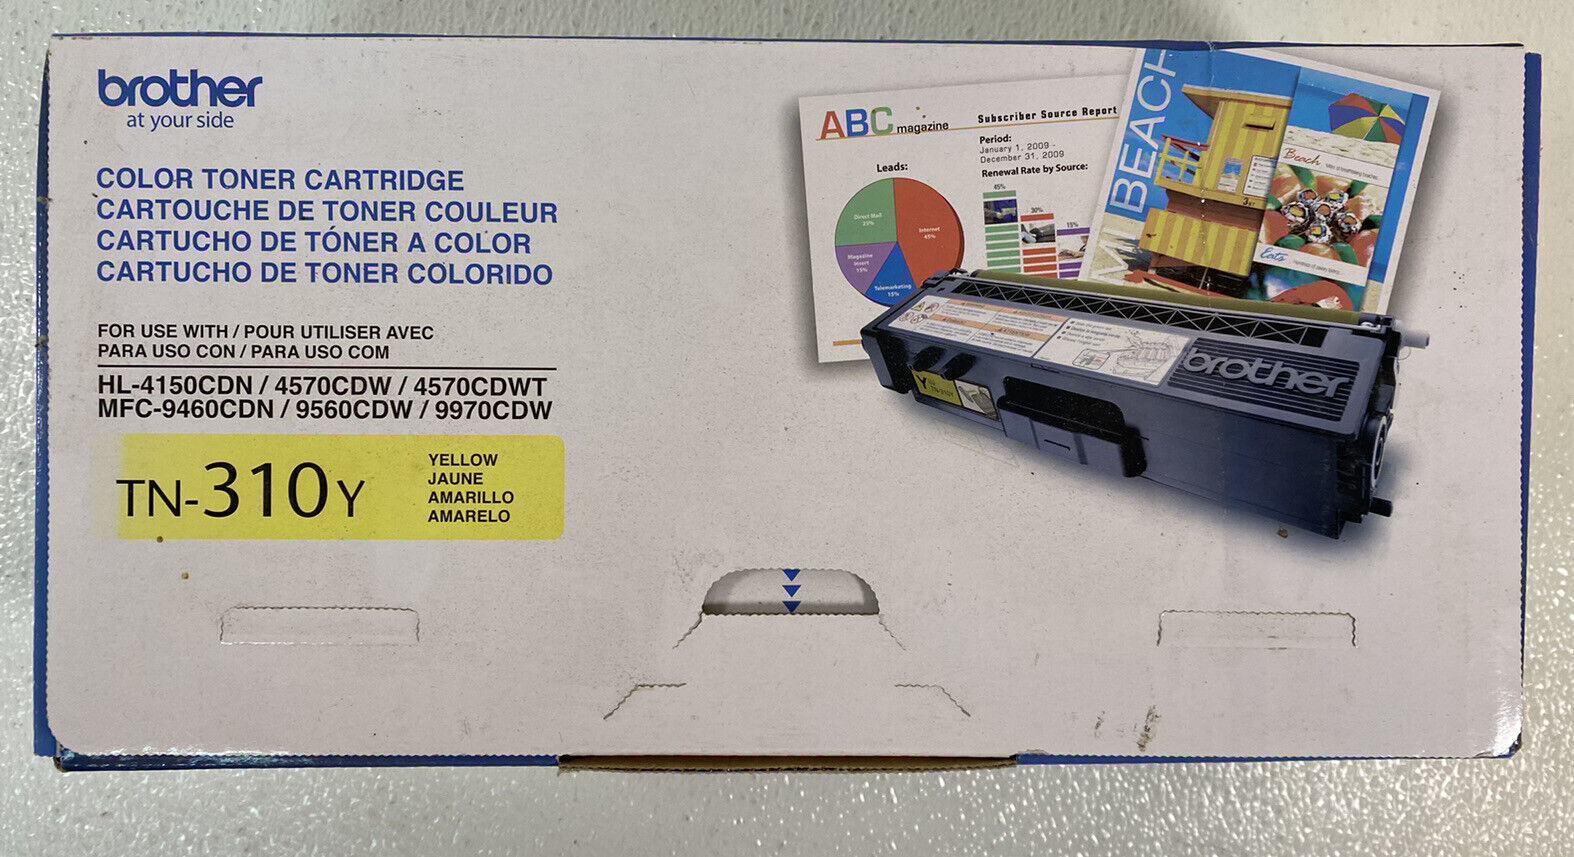 Brother TN-310Y Color Toner Cartridge Yellow Brand new Genuine OEM SEALED